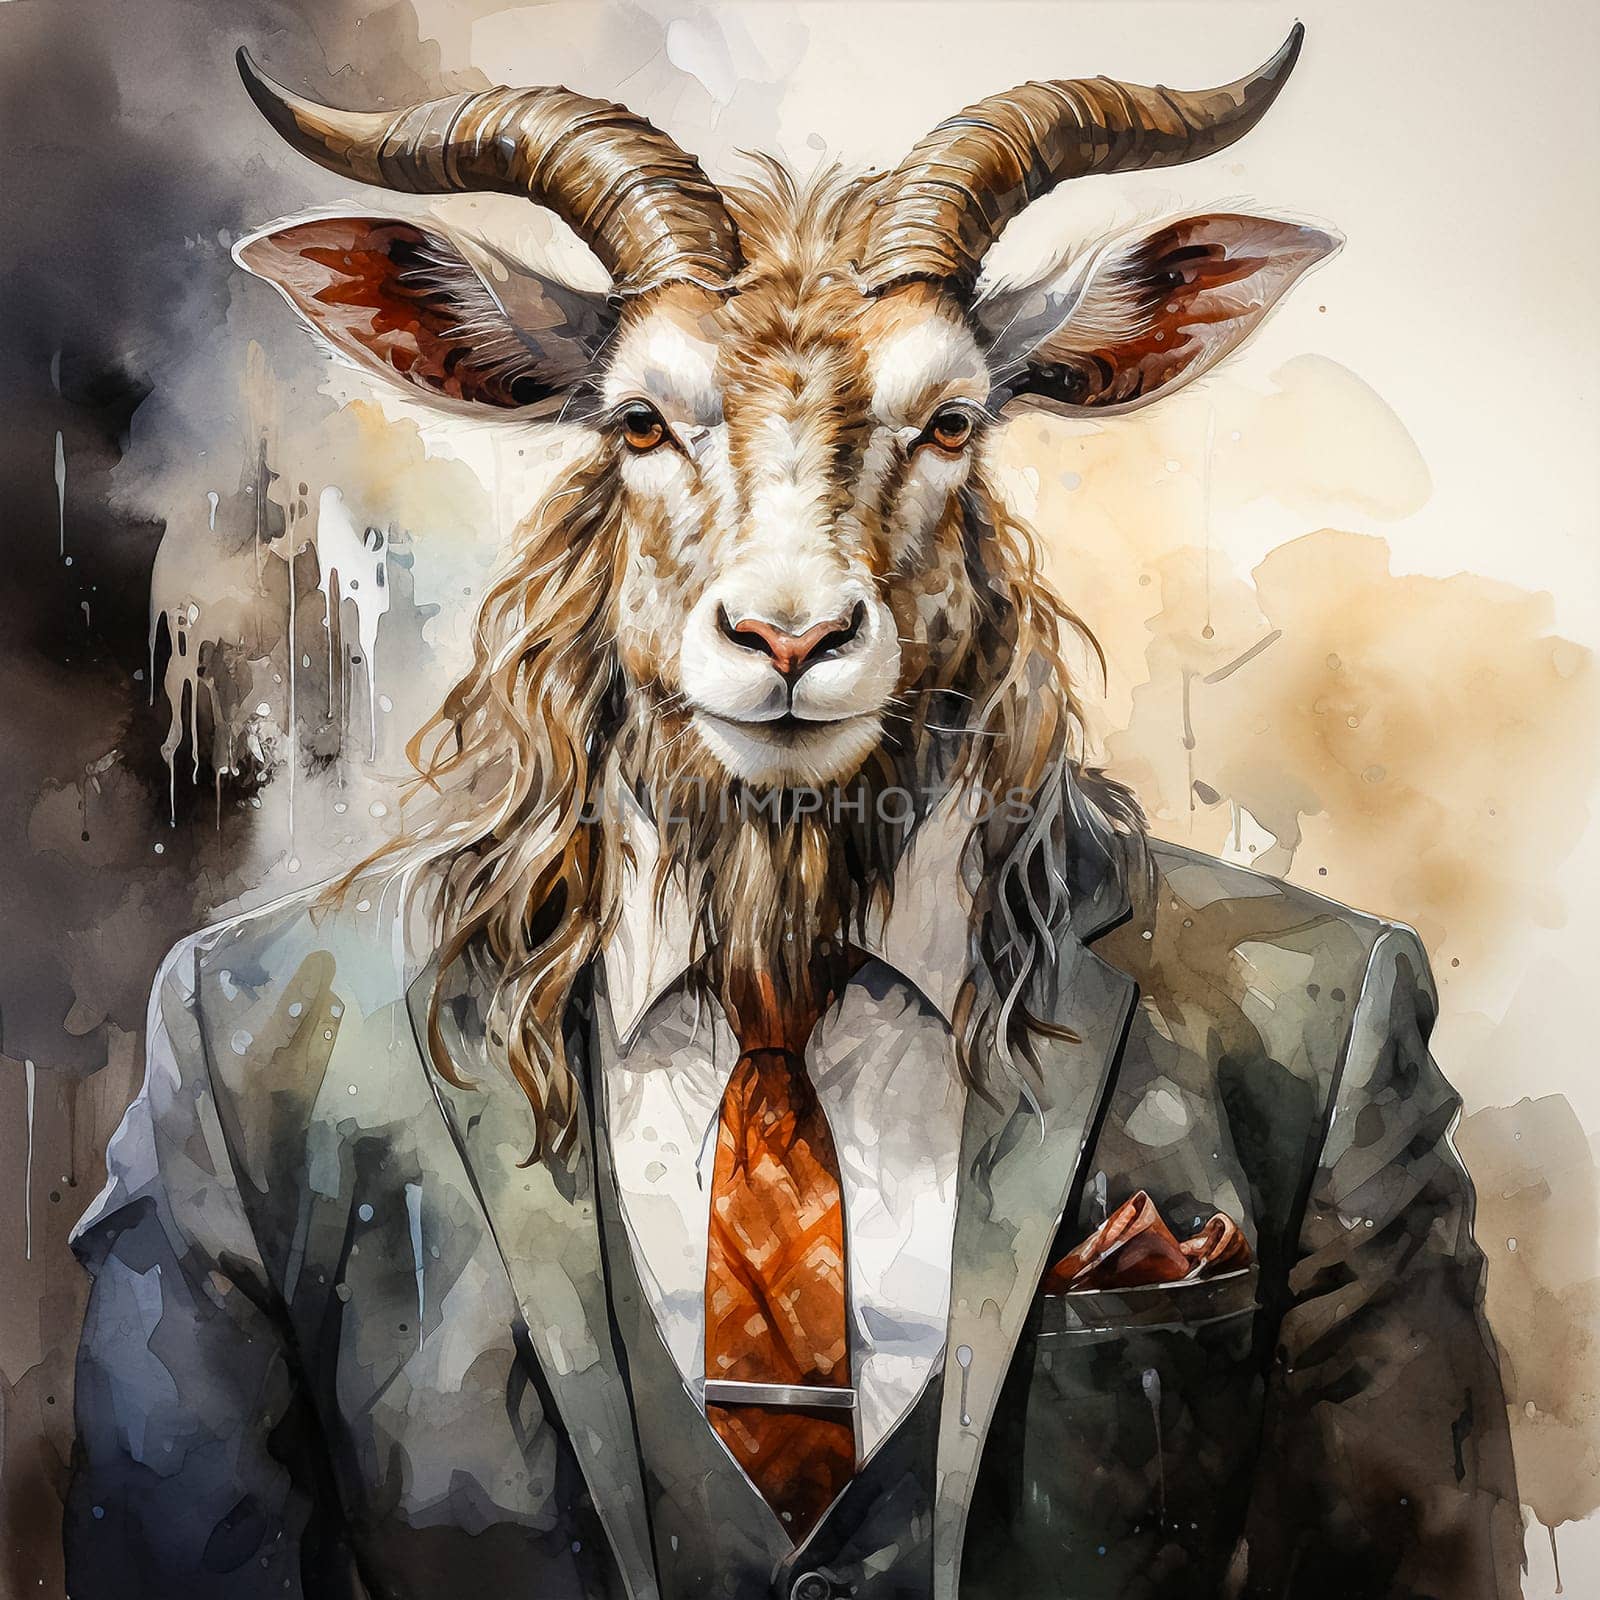 Business watercolors of a racing goat in elegant suits are a whimsical combination of the business world and natural charm, depicted with artistic flair.